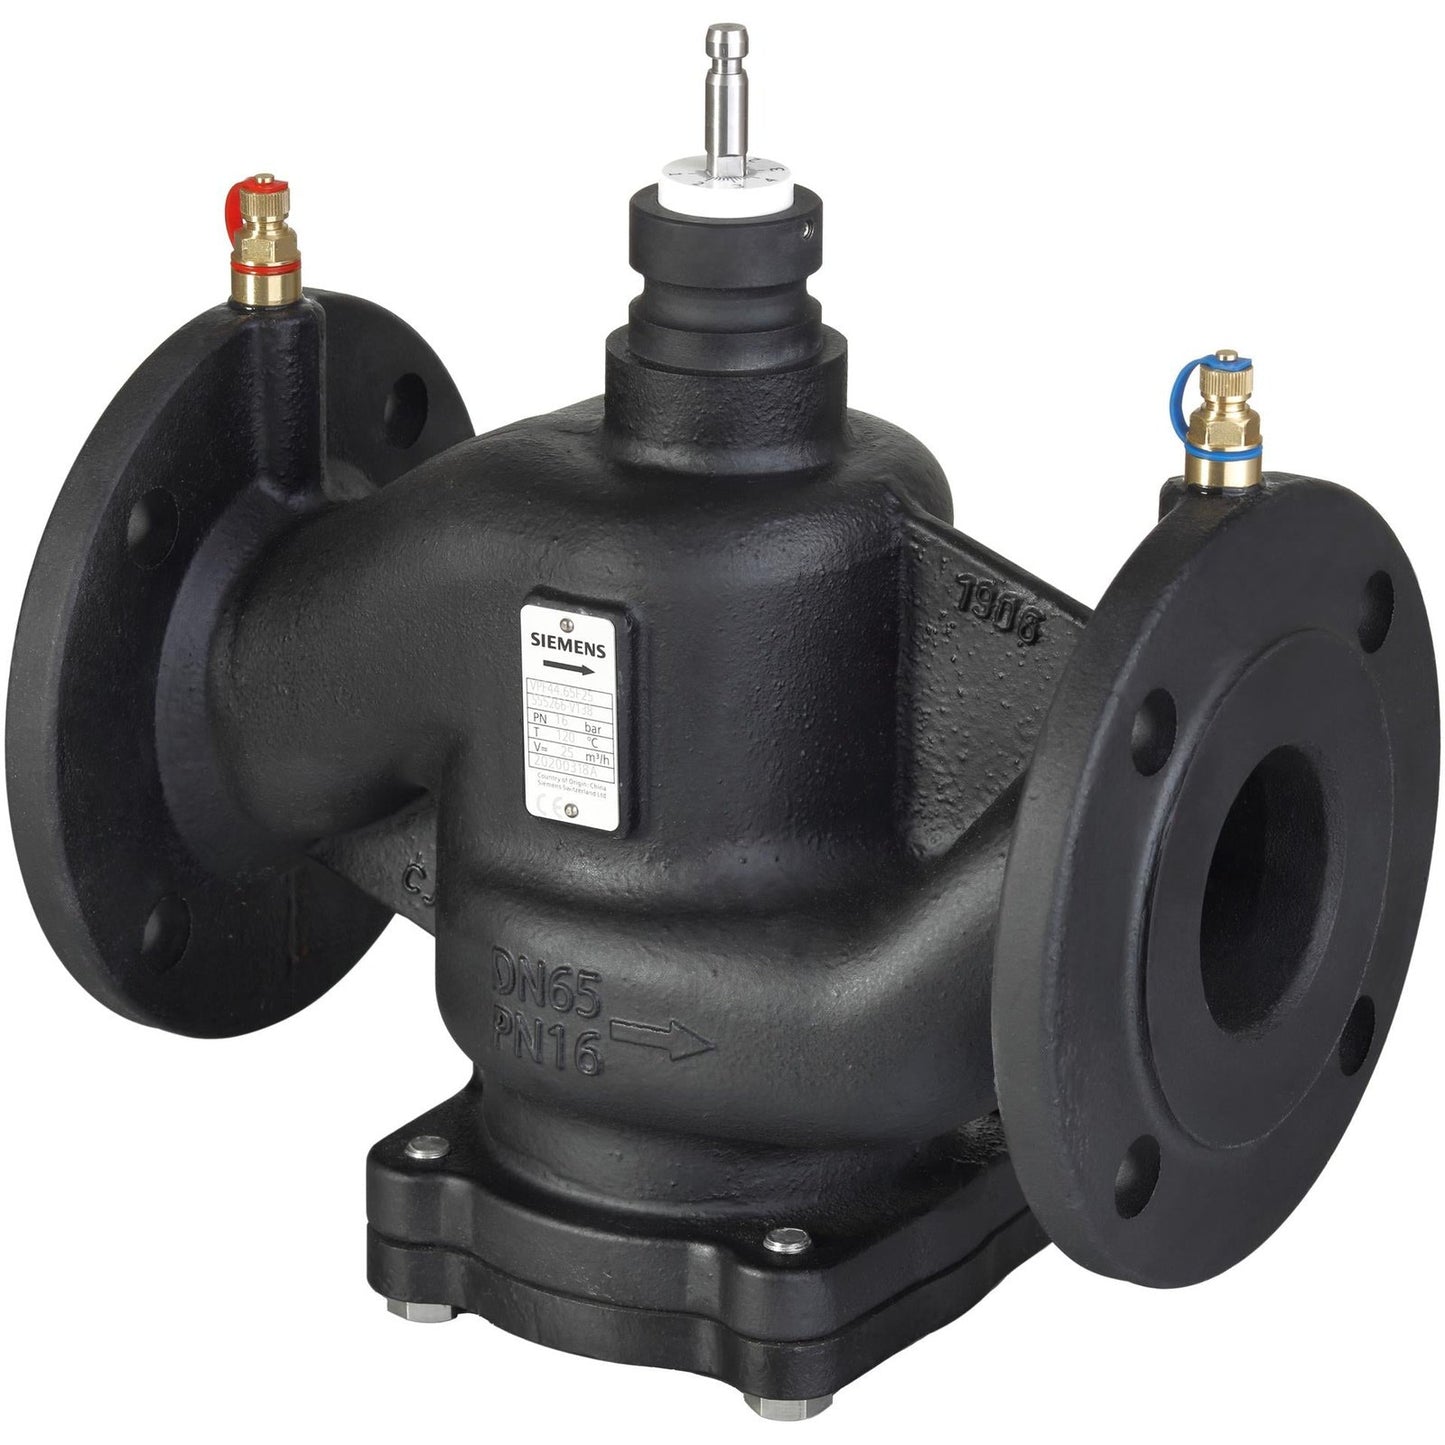 VPF44.100F90 Pressure independent control valve (PICV), PN16, DN100, with flanged connections